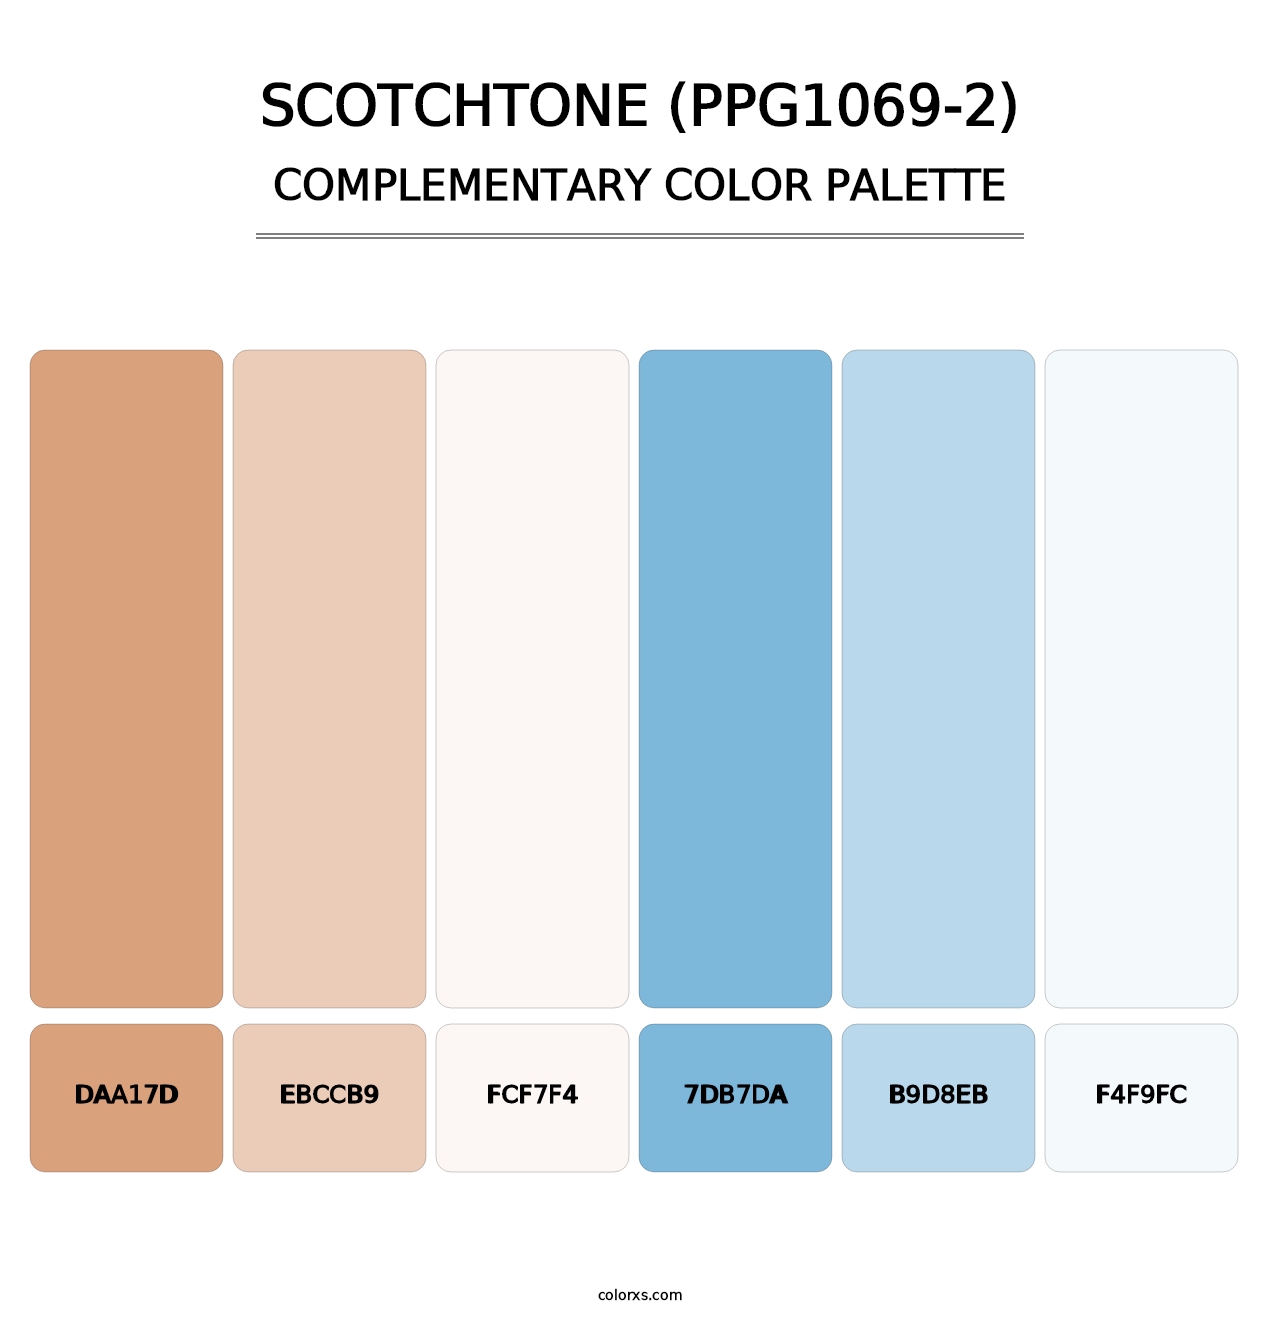 Scotchtone (PPG1069-2) - Complementary Color Palette